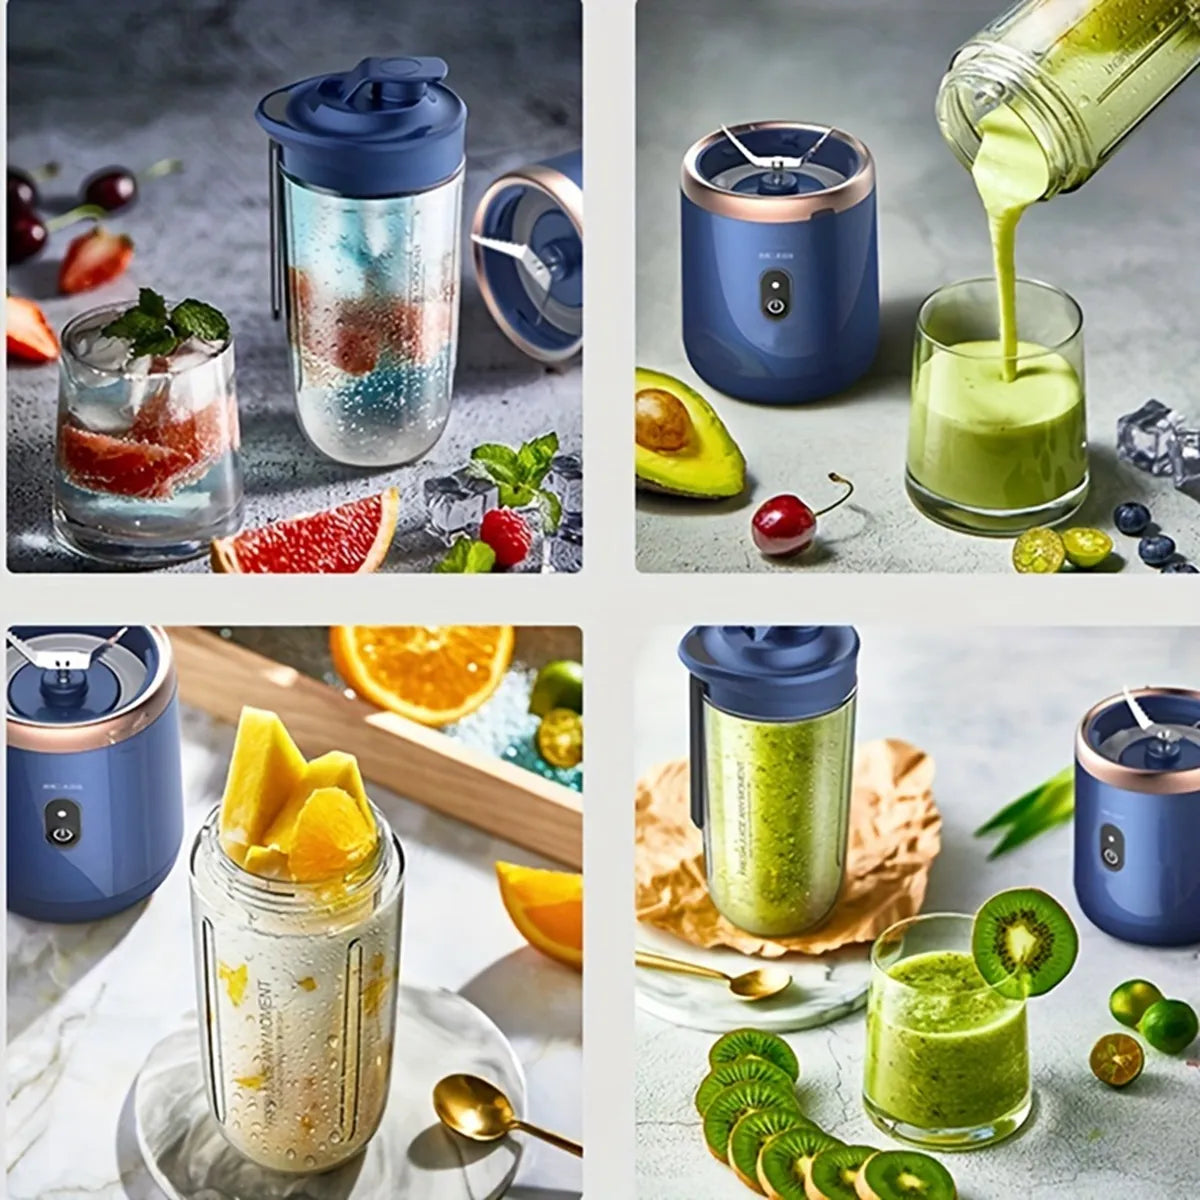 The Portable USB Juicer Blender shown in multiple settings, including making smoothies with strawberries and pouring a green smoothie. This versatile blender is ideal for creating healthy drinks anywhere, demonstrating its practical design and efficiency.